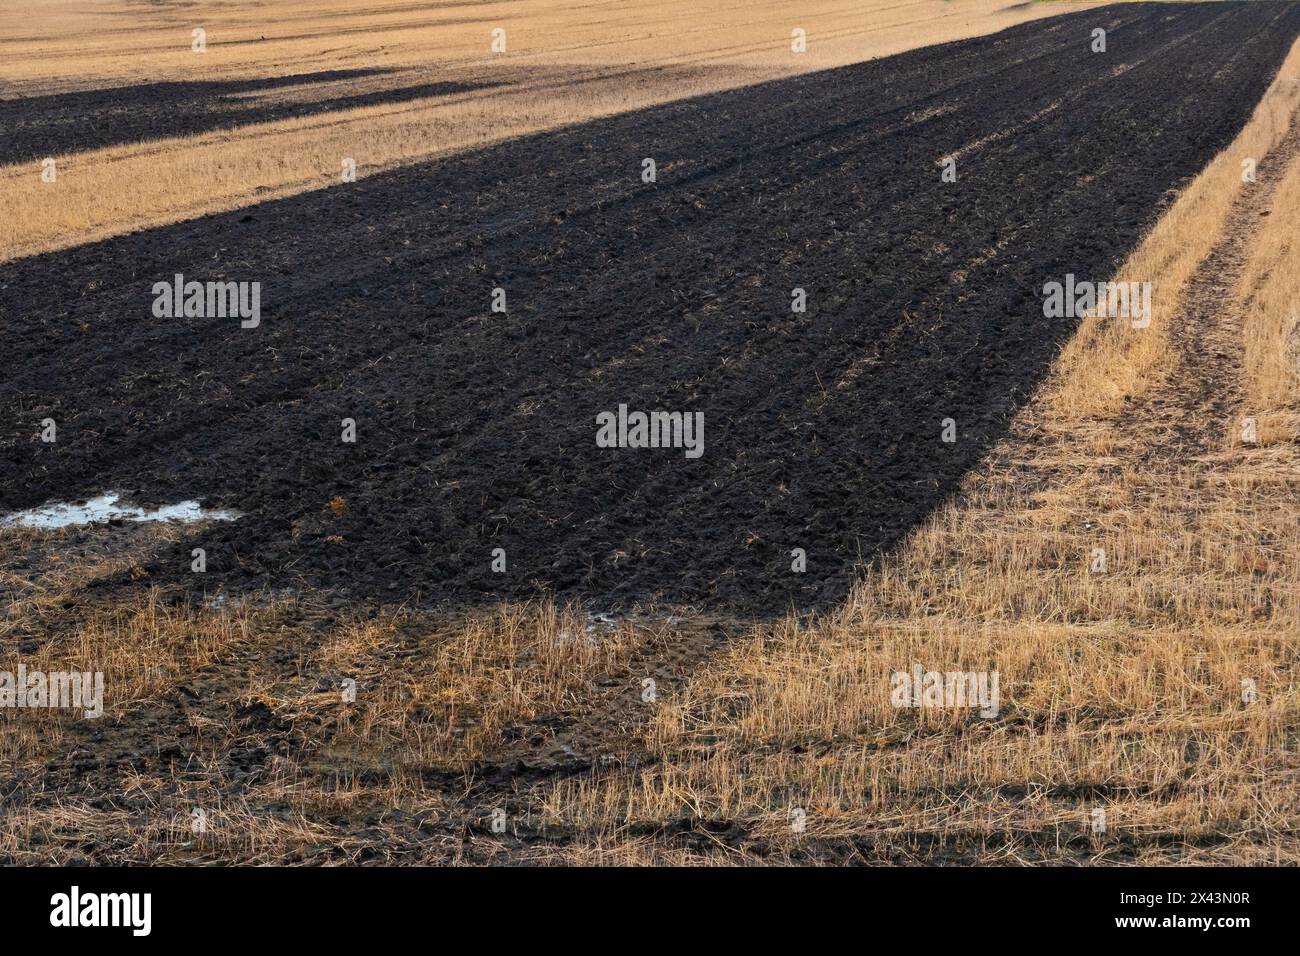 Field treated with glyphosate is being prepared for cultivation by applying manure and plowing under sprayed plant residues Stock Photo